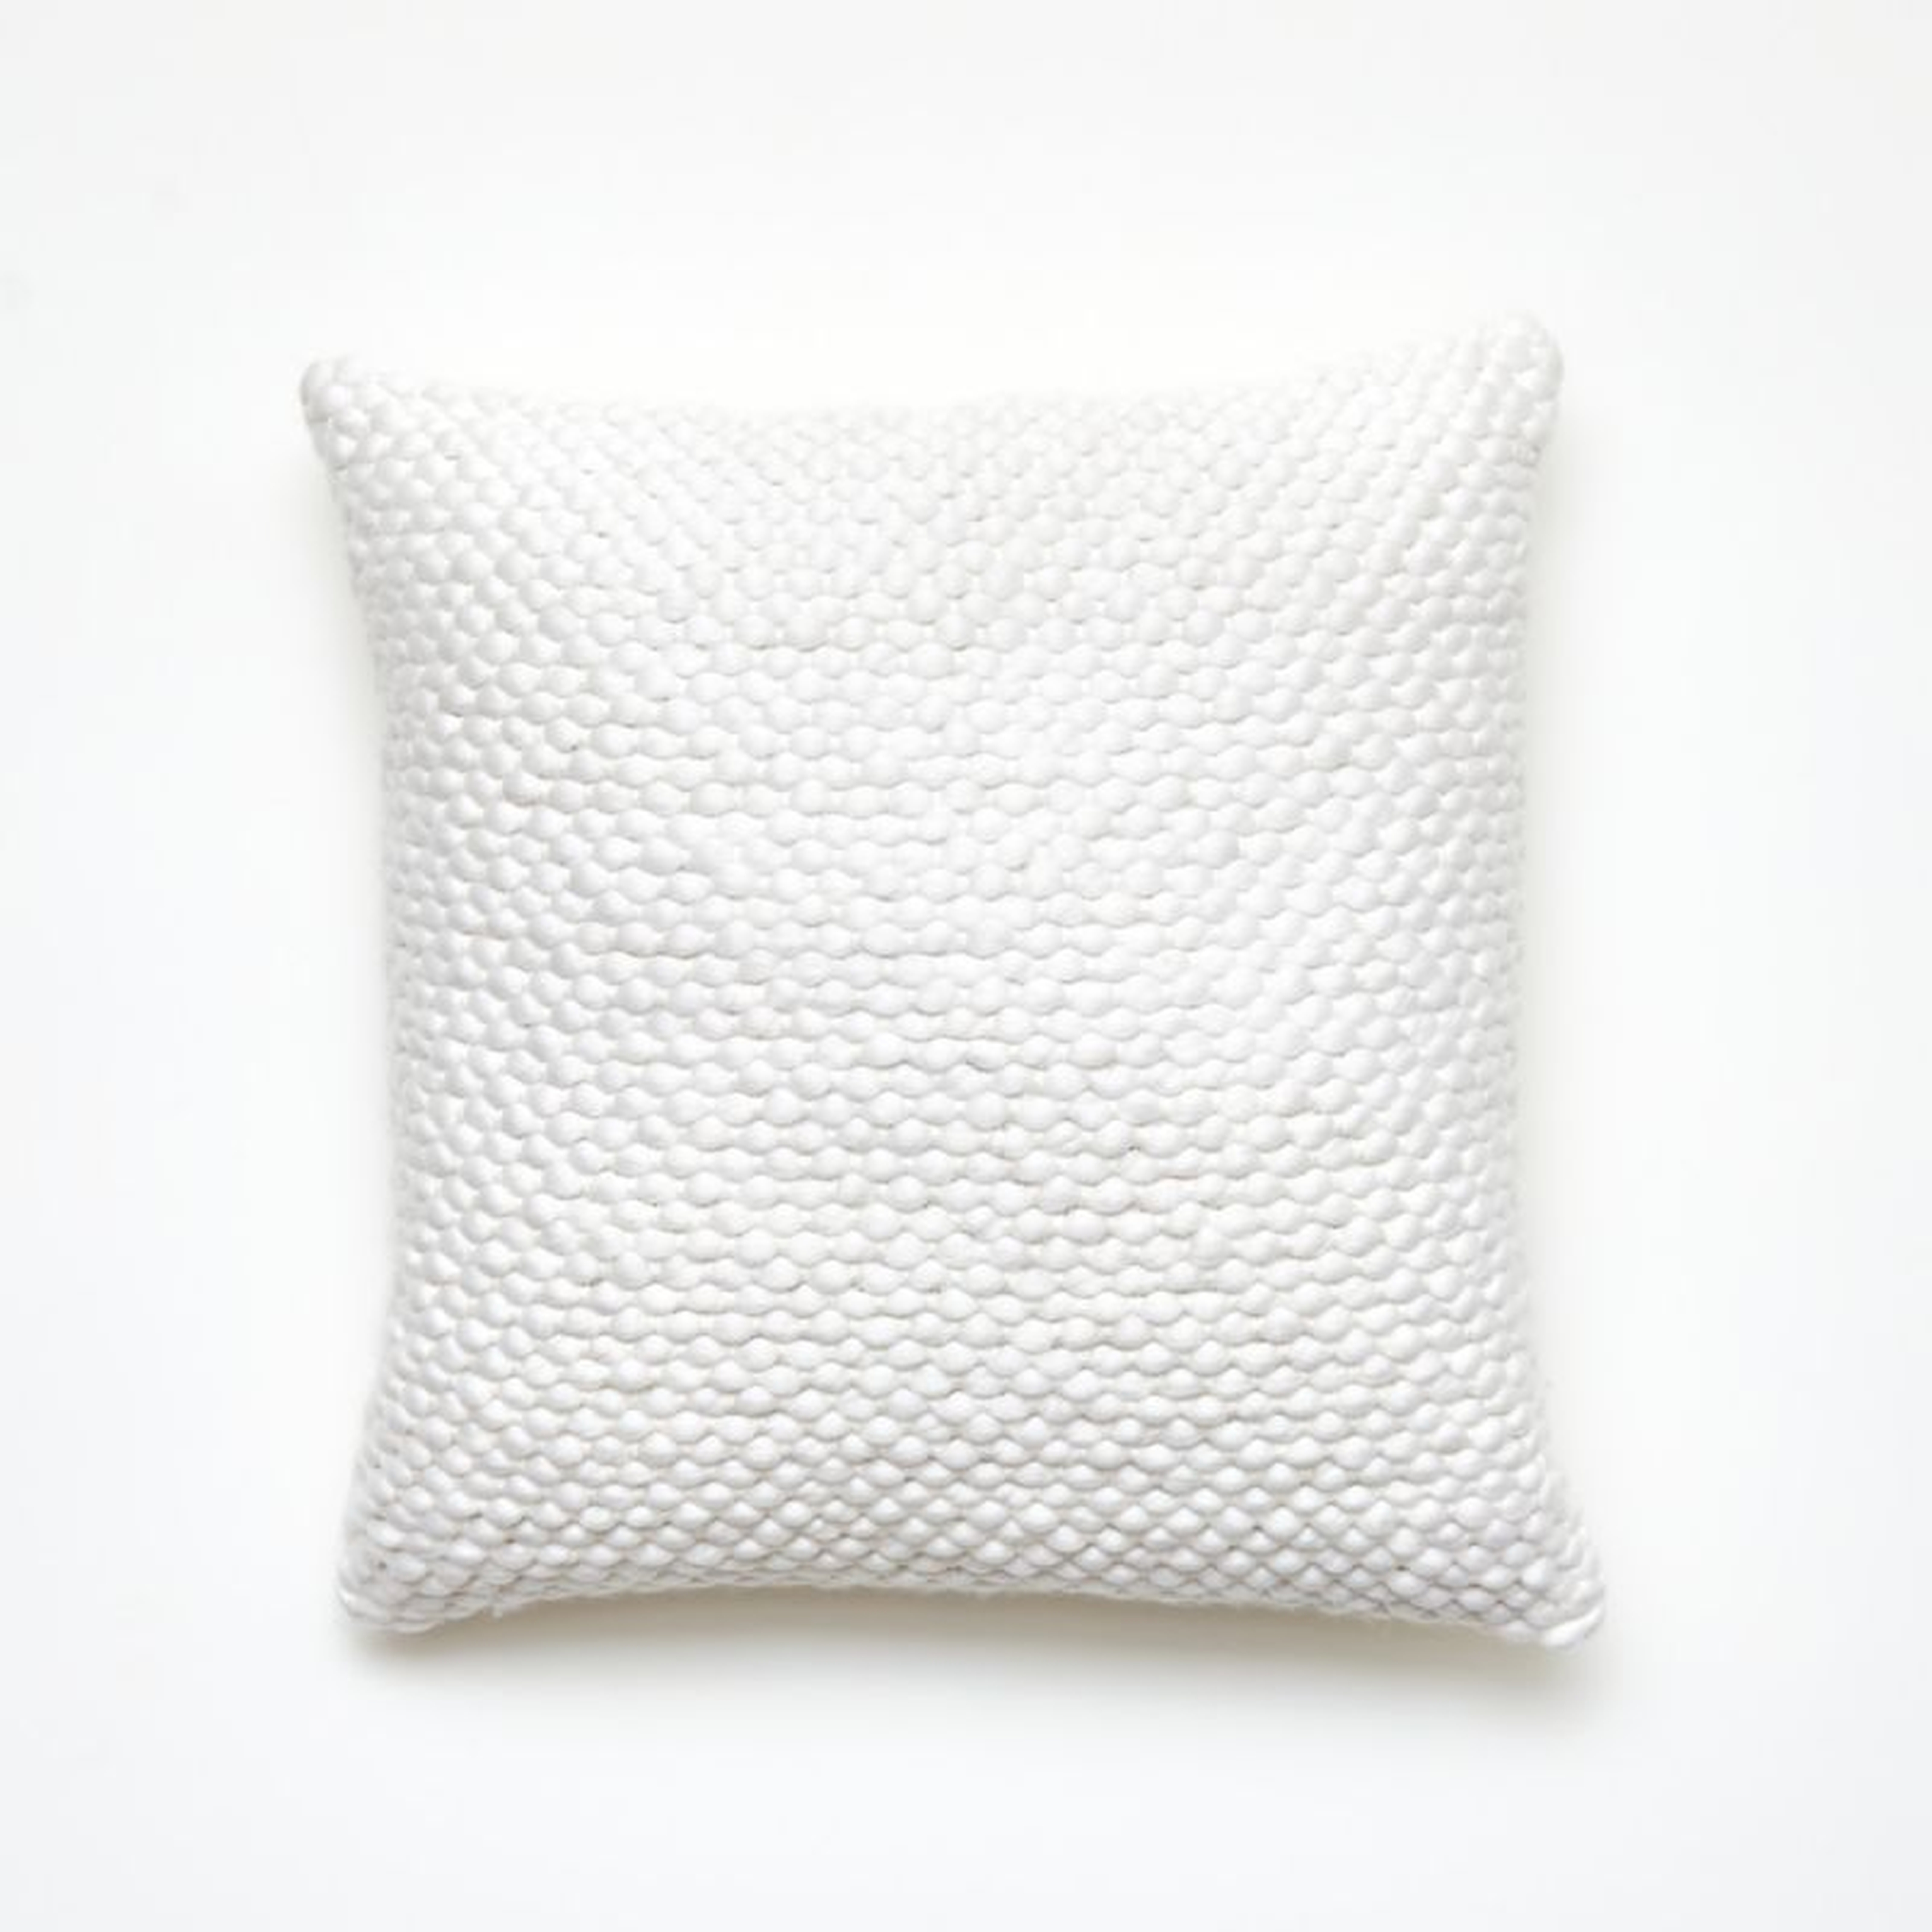 Remy Pillow with Down-Alternative Insert, White, 18" x 18" - CB2